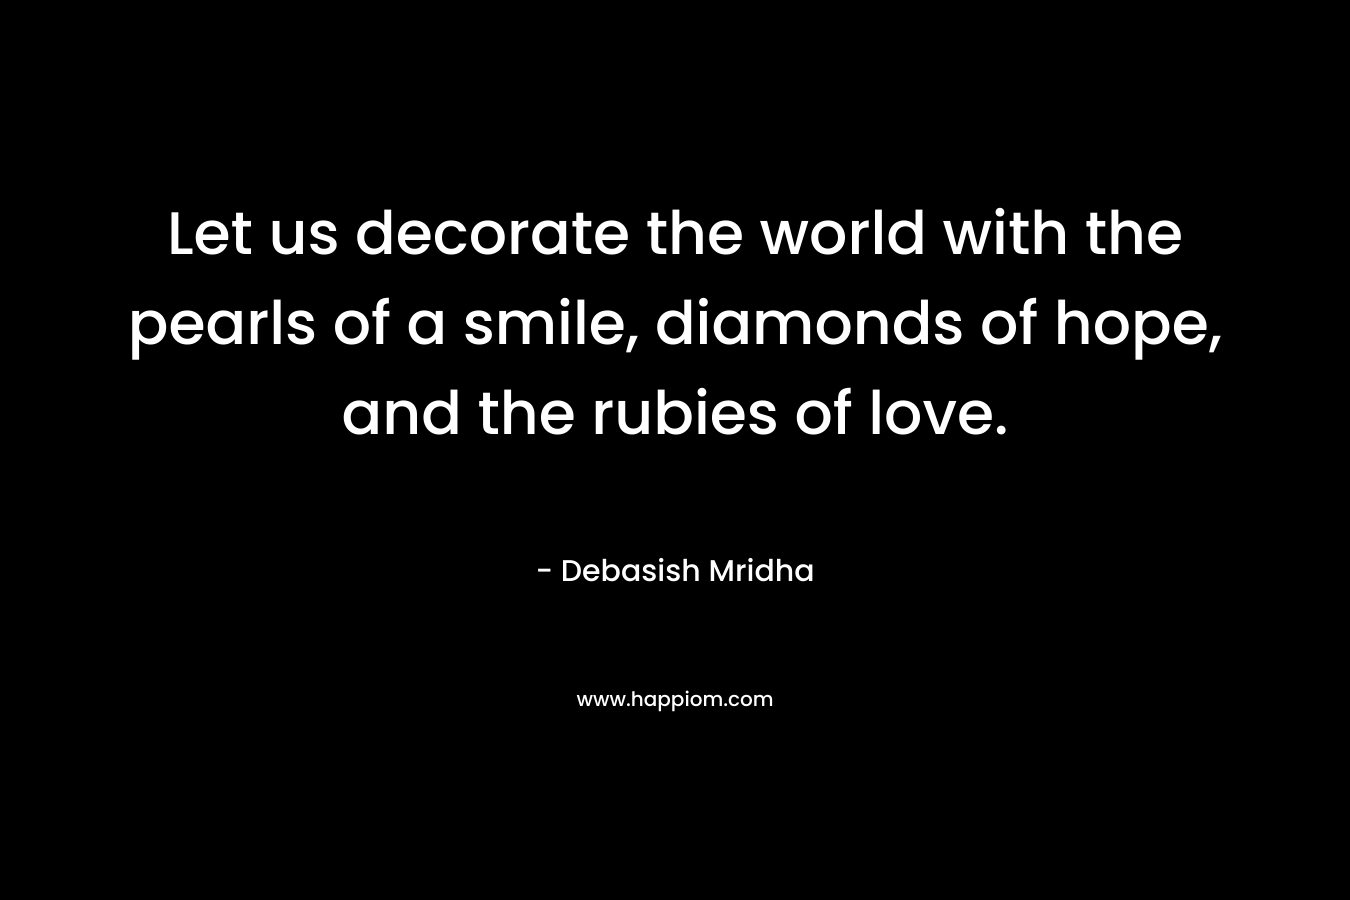 Let us decorate the world with the pearls of a smile, diamonds of hope, and the rubies of love.